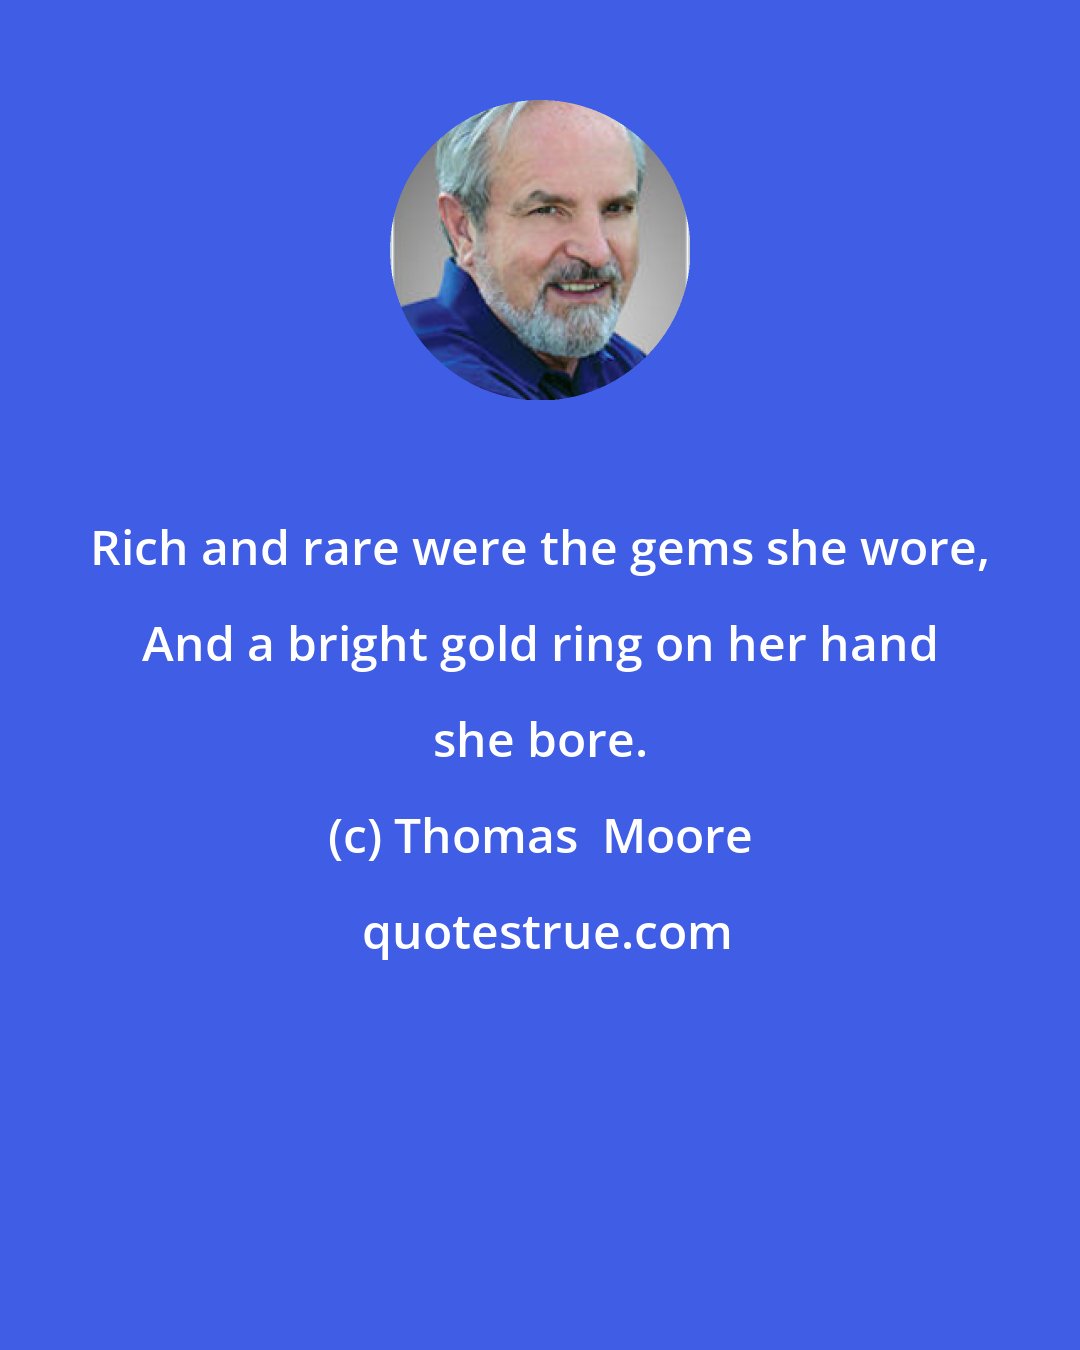 Thomas  Moore: Rich and rare were the gems she wore, And a bright gold ring on her hand she bore.